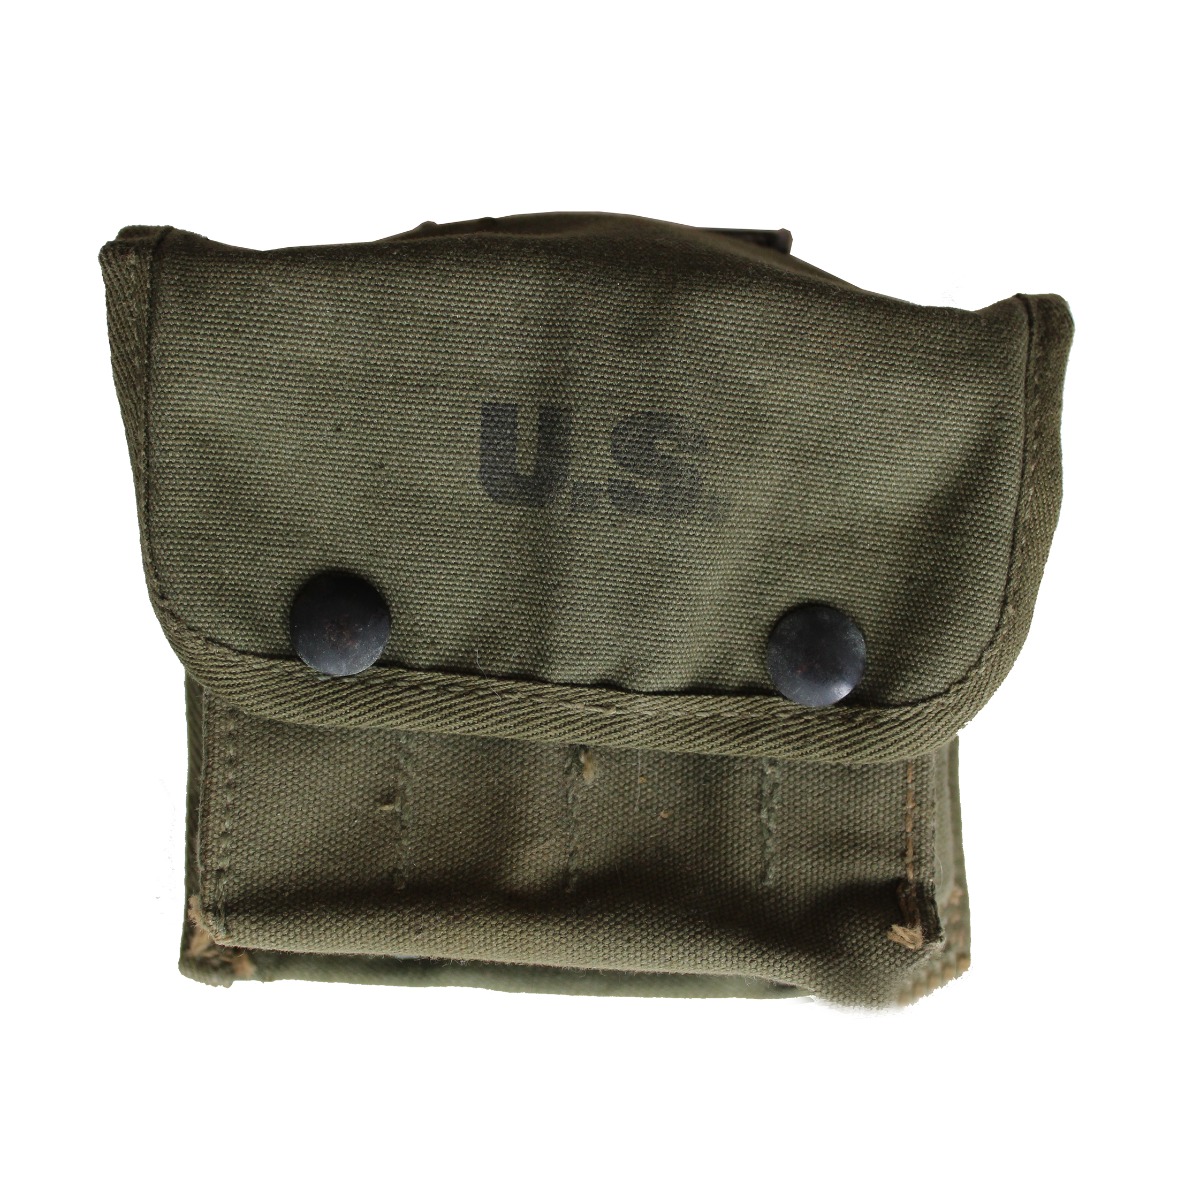 WWII US ARMY MEDIC POUCH DATED 1942